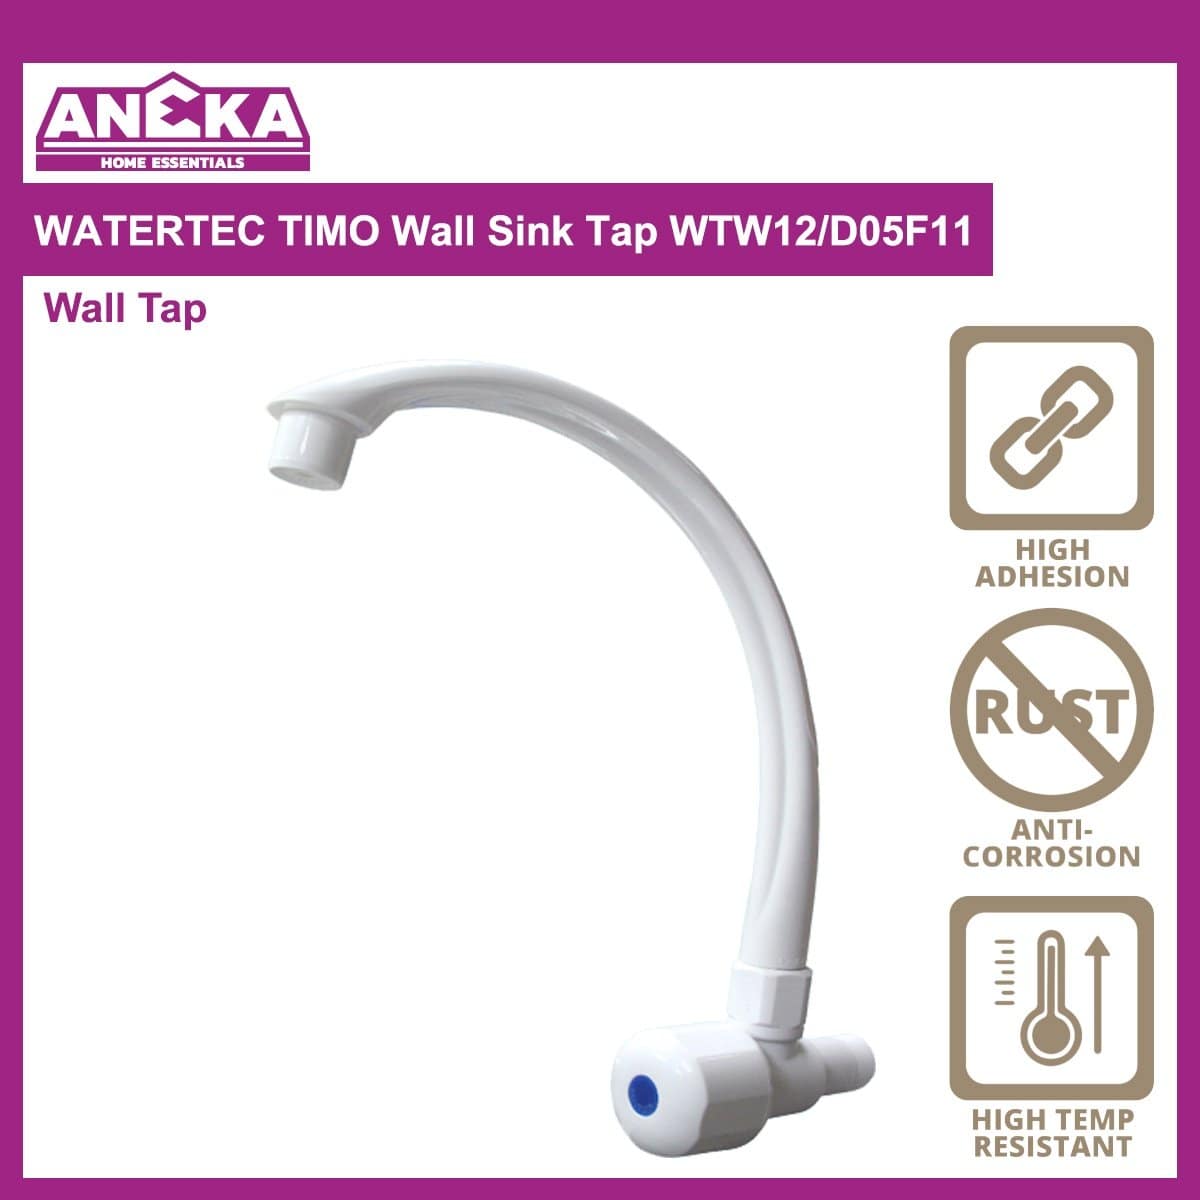 WATERTEC TIMO Wall Sink Tap WTW12/D05F11